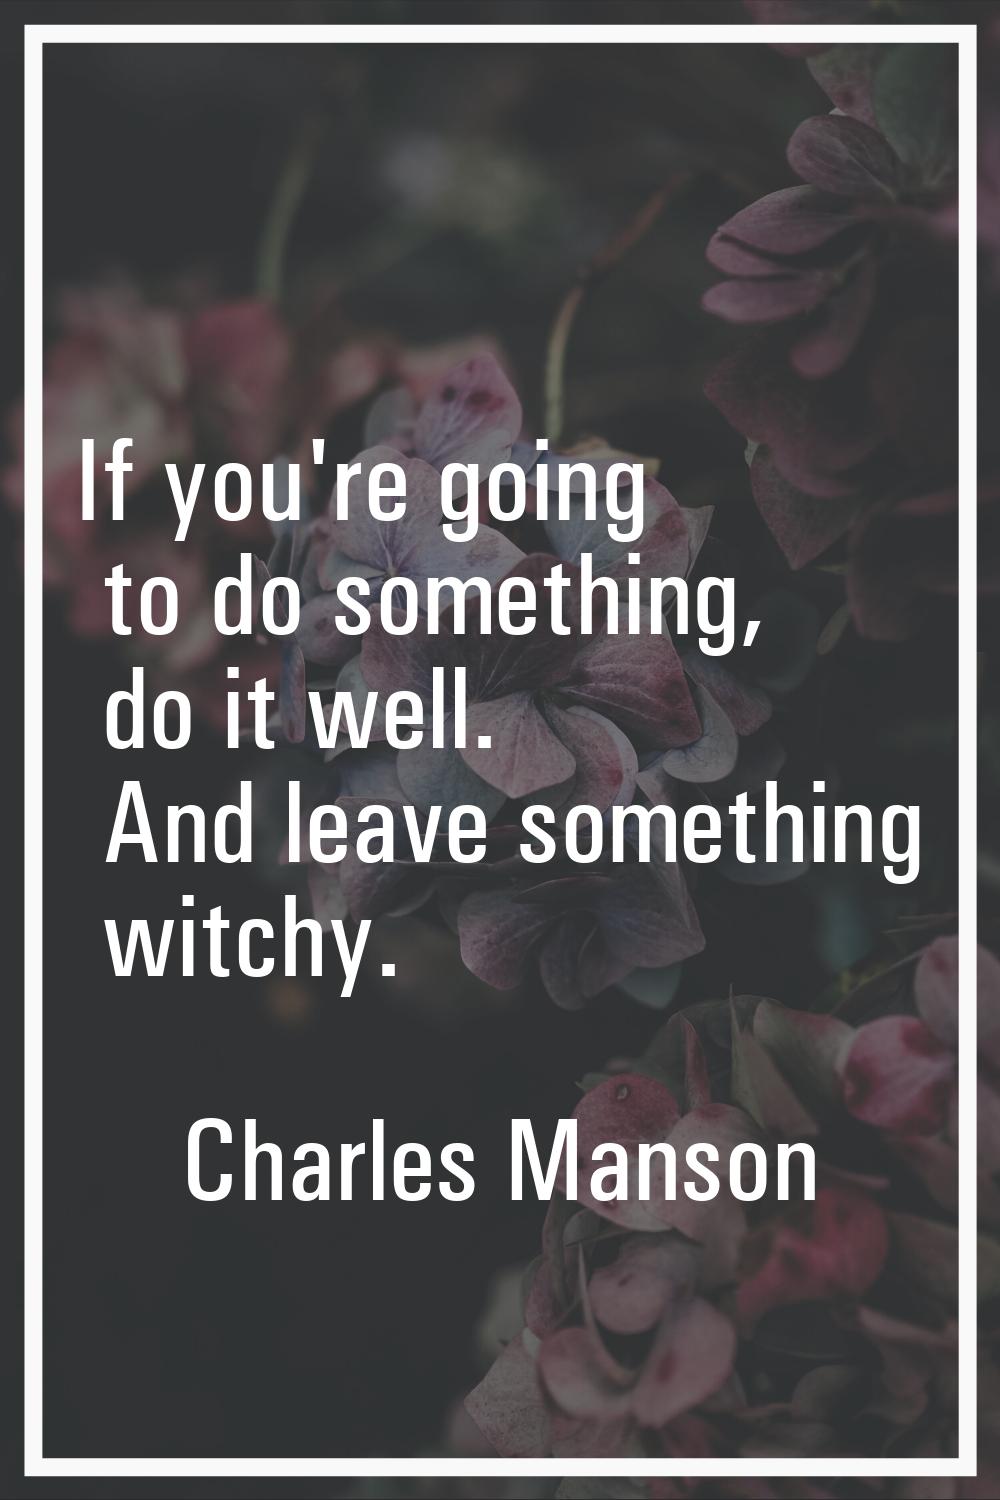 If you're going to do something, do it well. And leave something witchy.